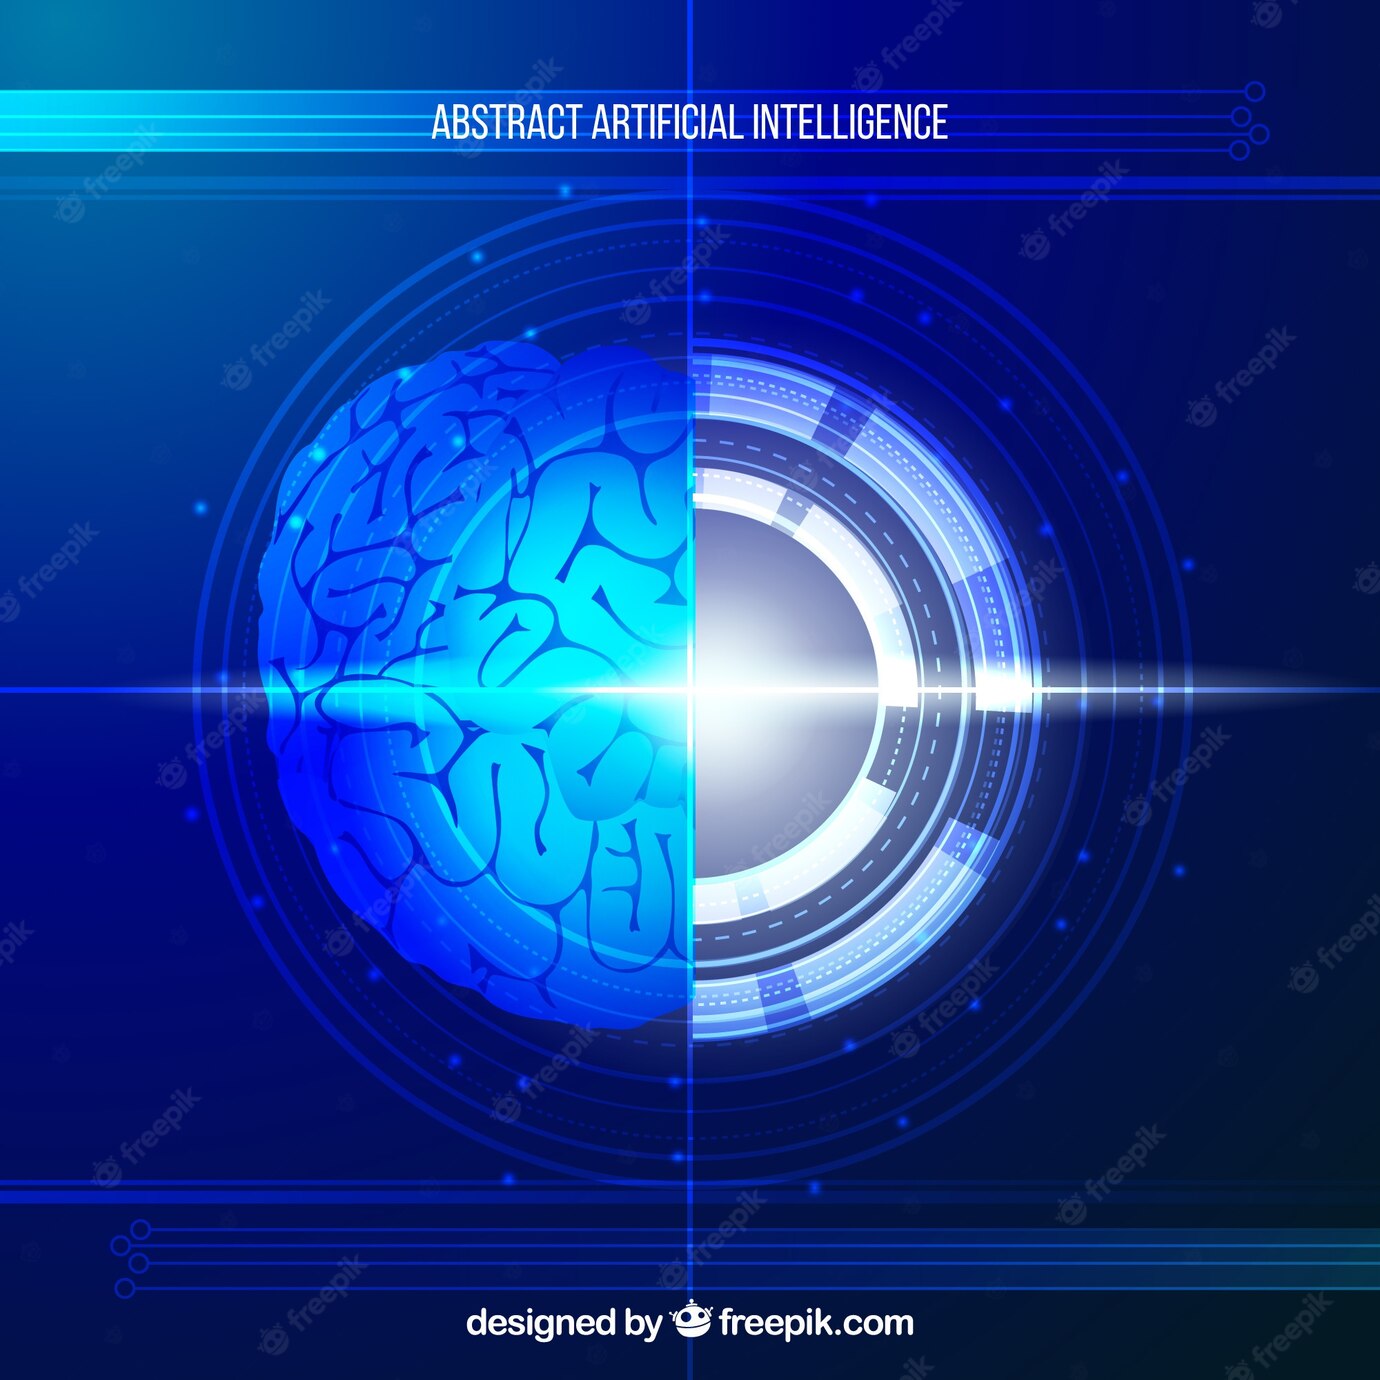 Abstract Artificial Intelligence Template 23 2147726809